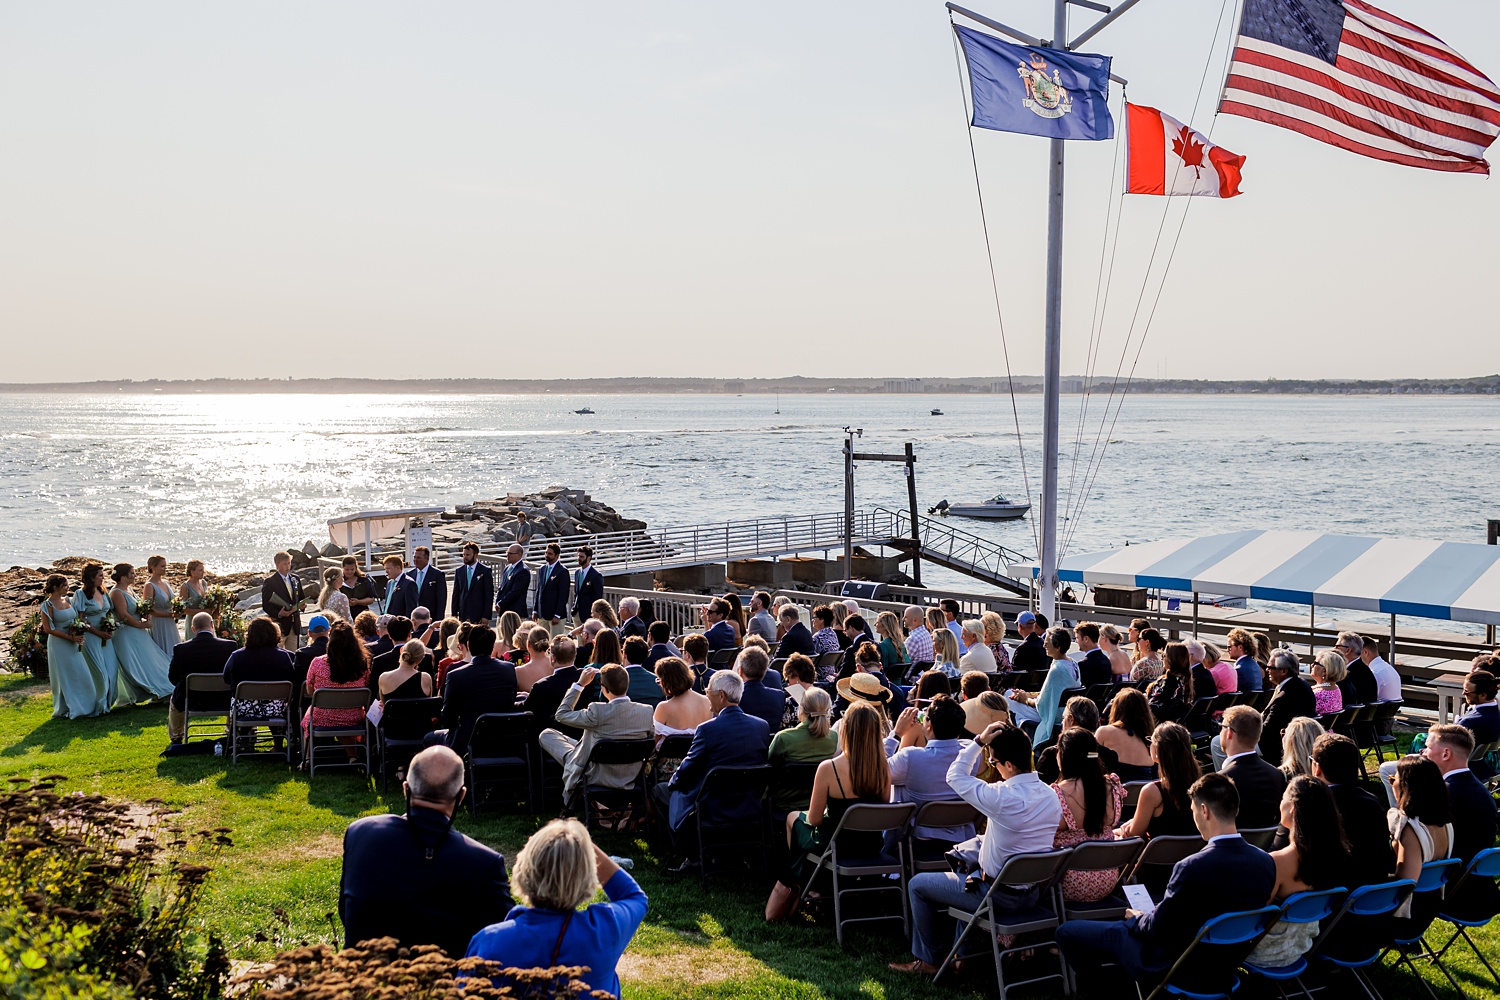 The wedding day ceremony at Prout's Neck Yacht Club in Maine